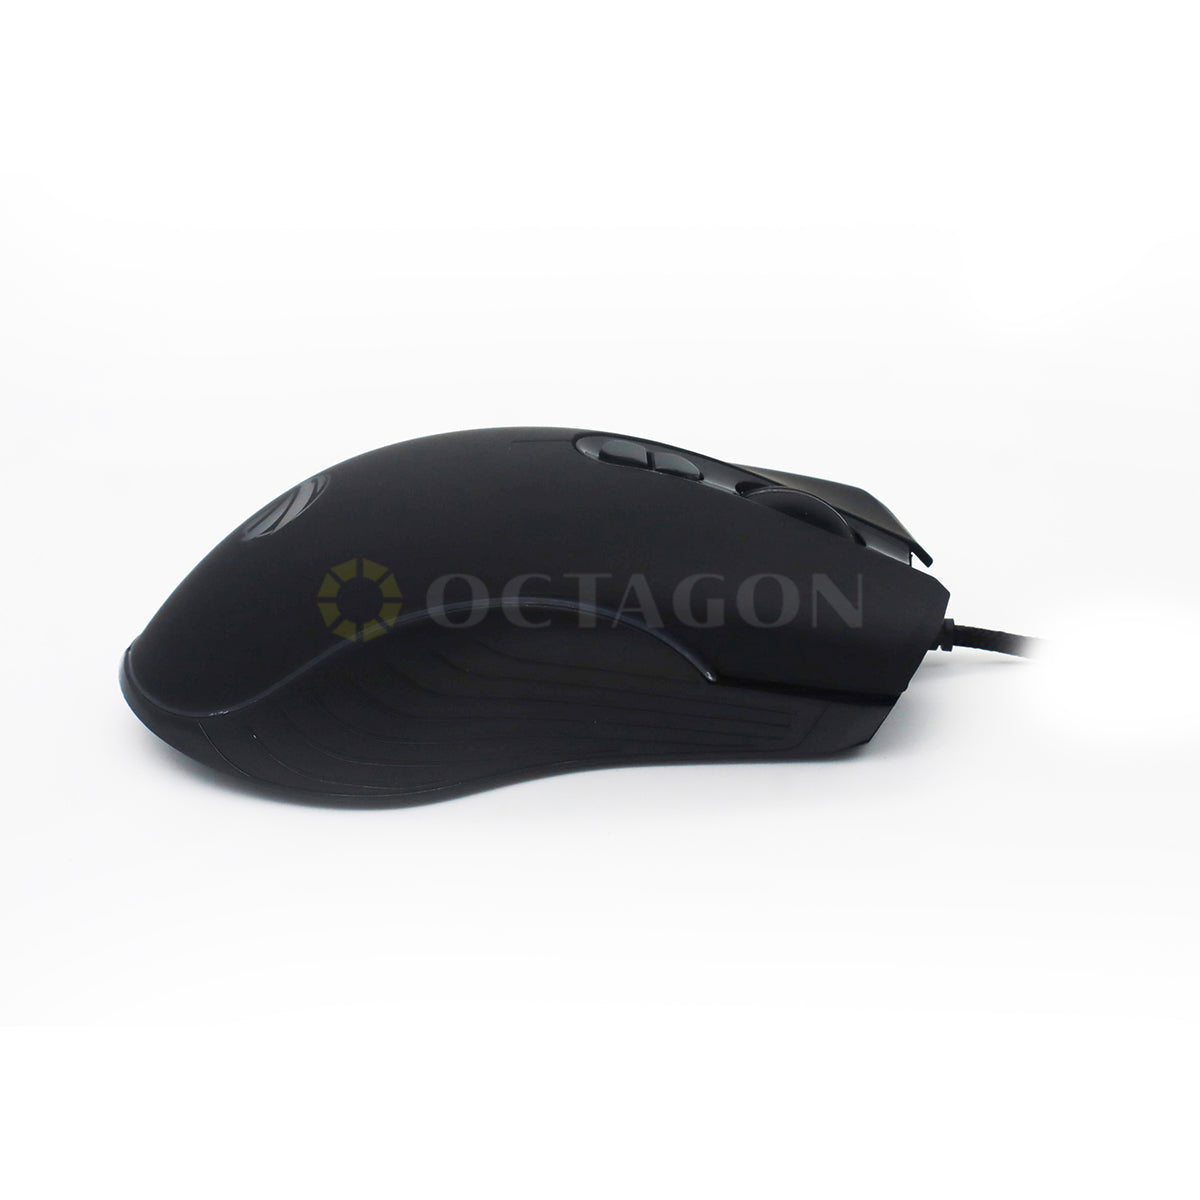 IMPERIOR Gaming Mouse - wireless, rubber-black